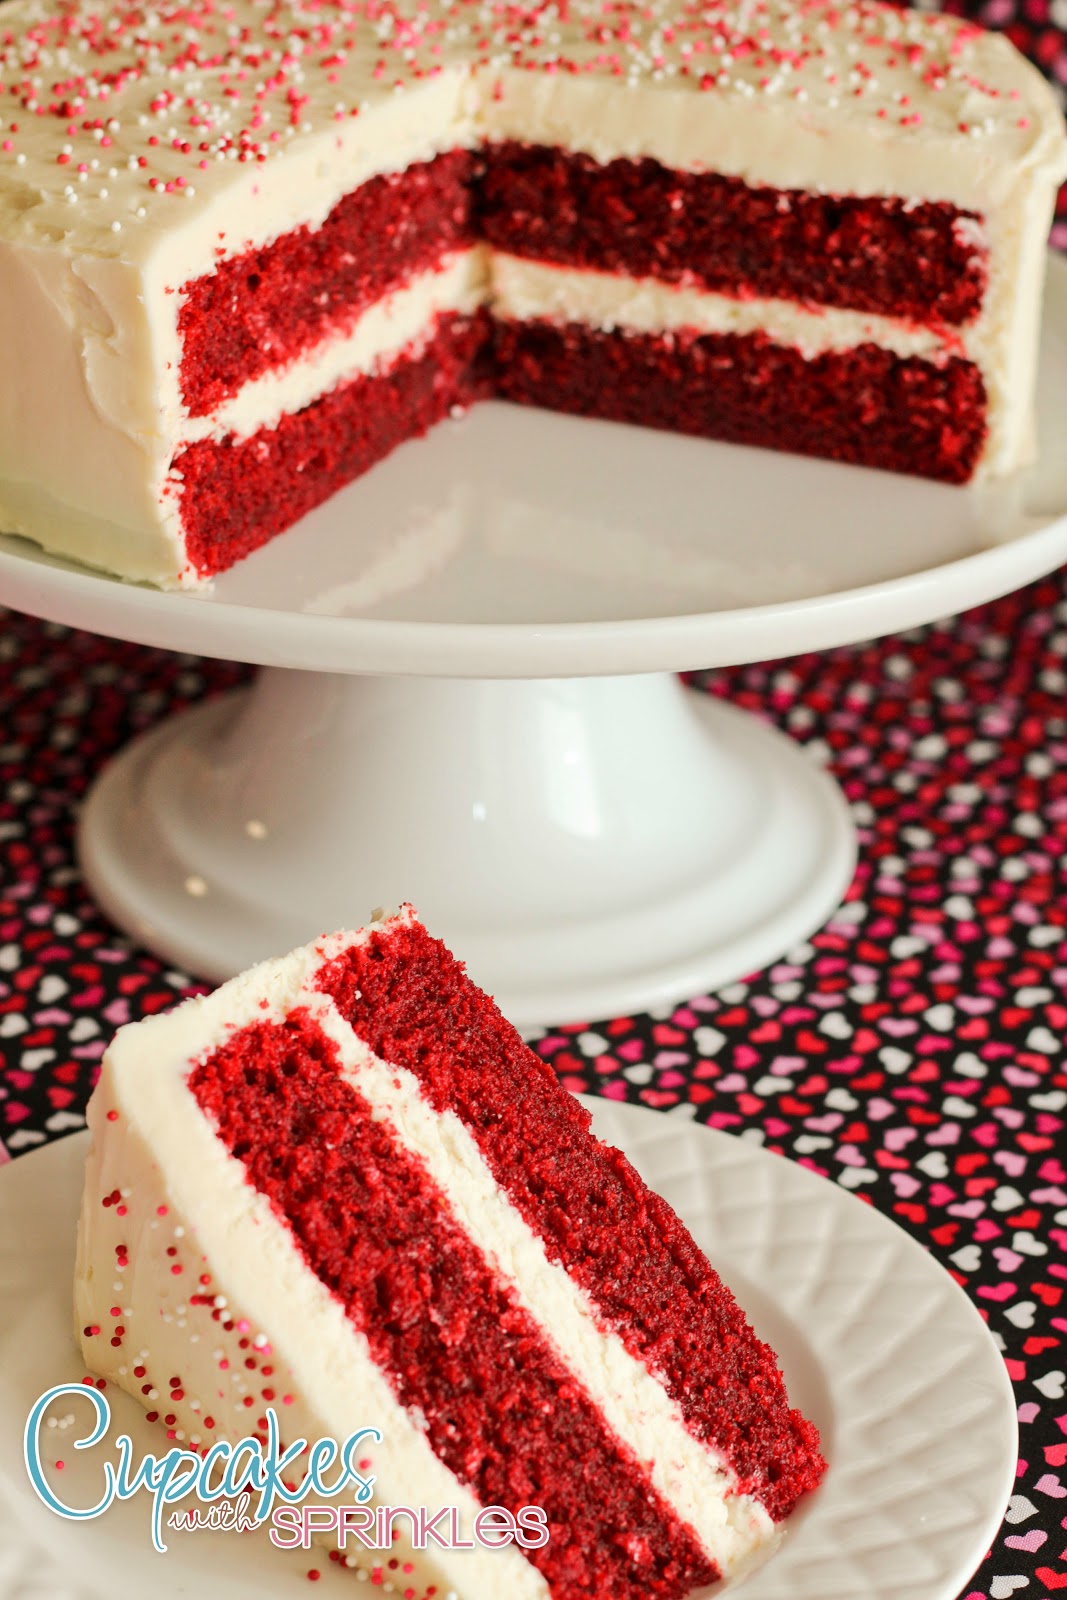 Red Velvet Cake Recipe With Cream Cheese Frosting